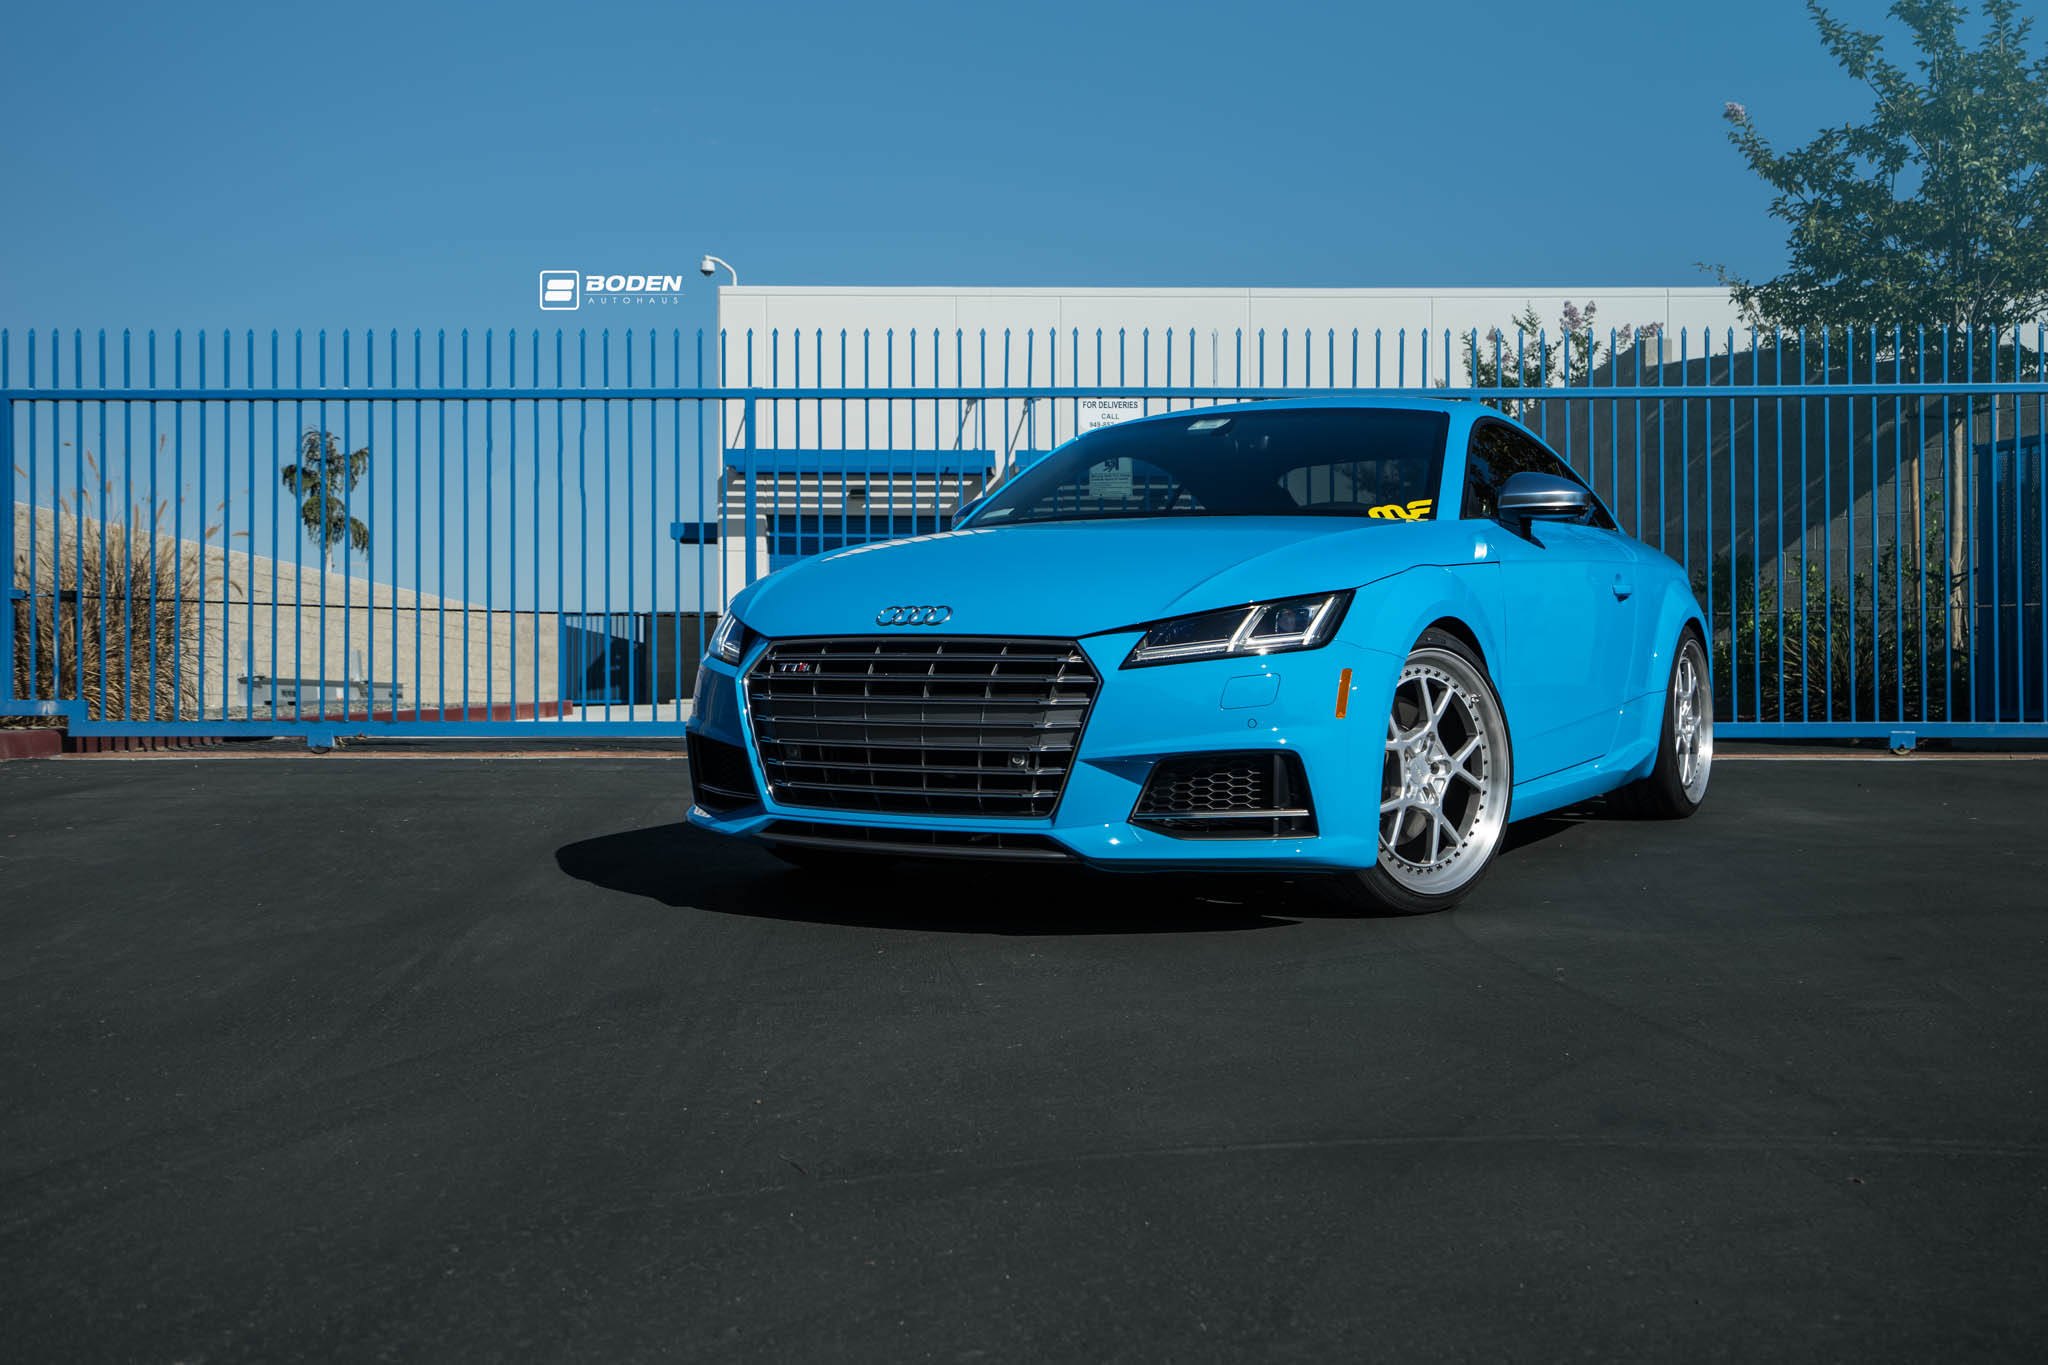 Blacked Out Billet Grille on Blue Audi TT - Photo by Boden Autohaus